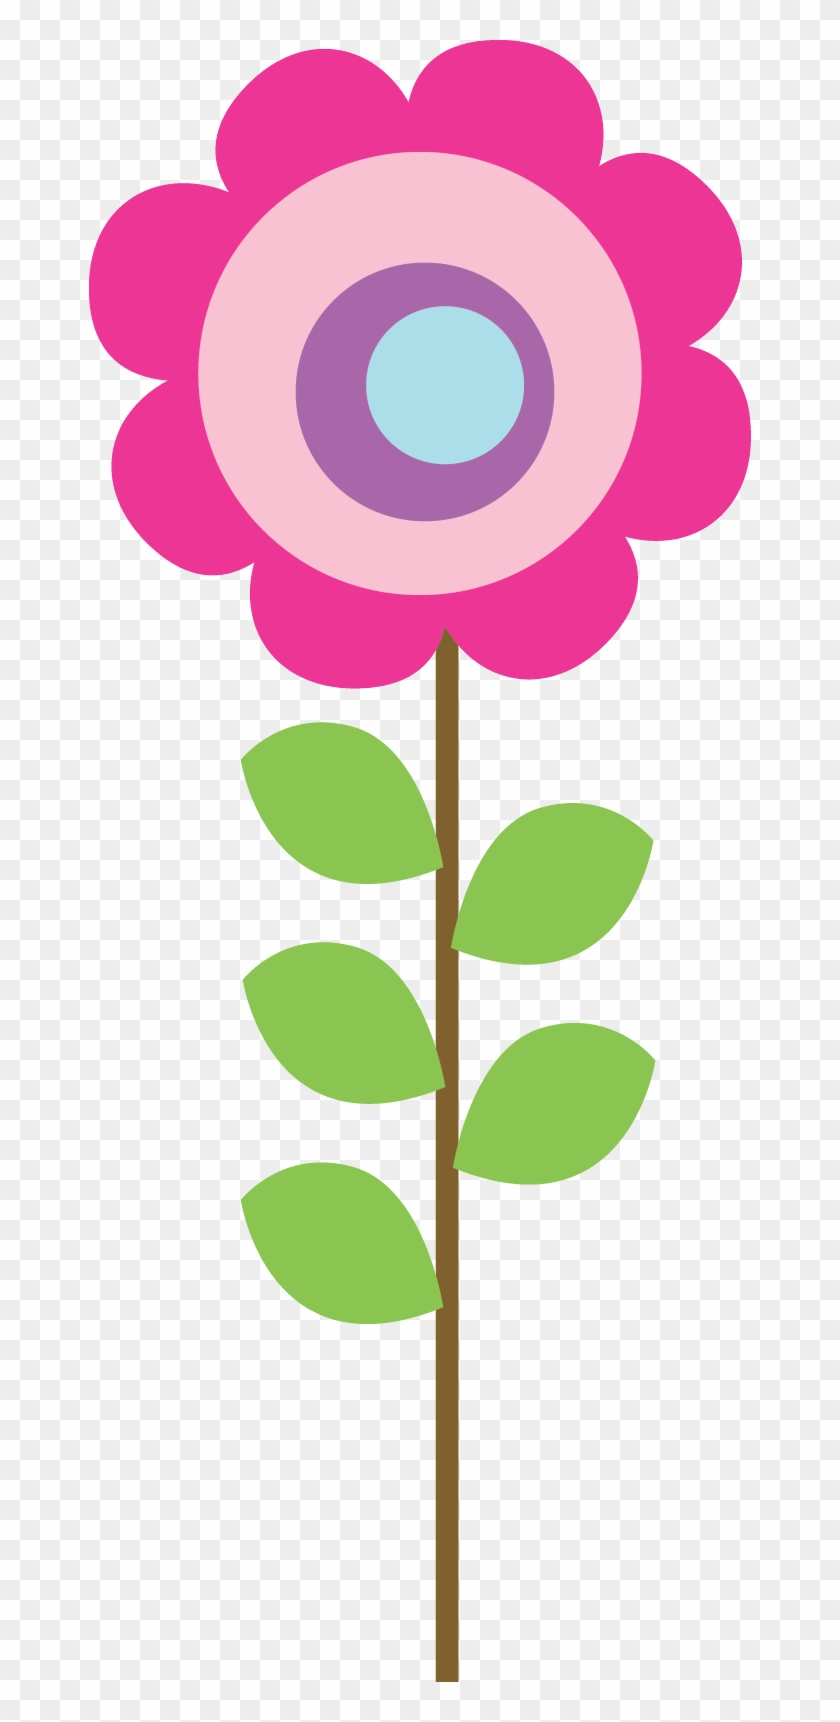 Say Hello - Pastel Flower Clipart Png #363347